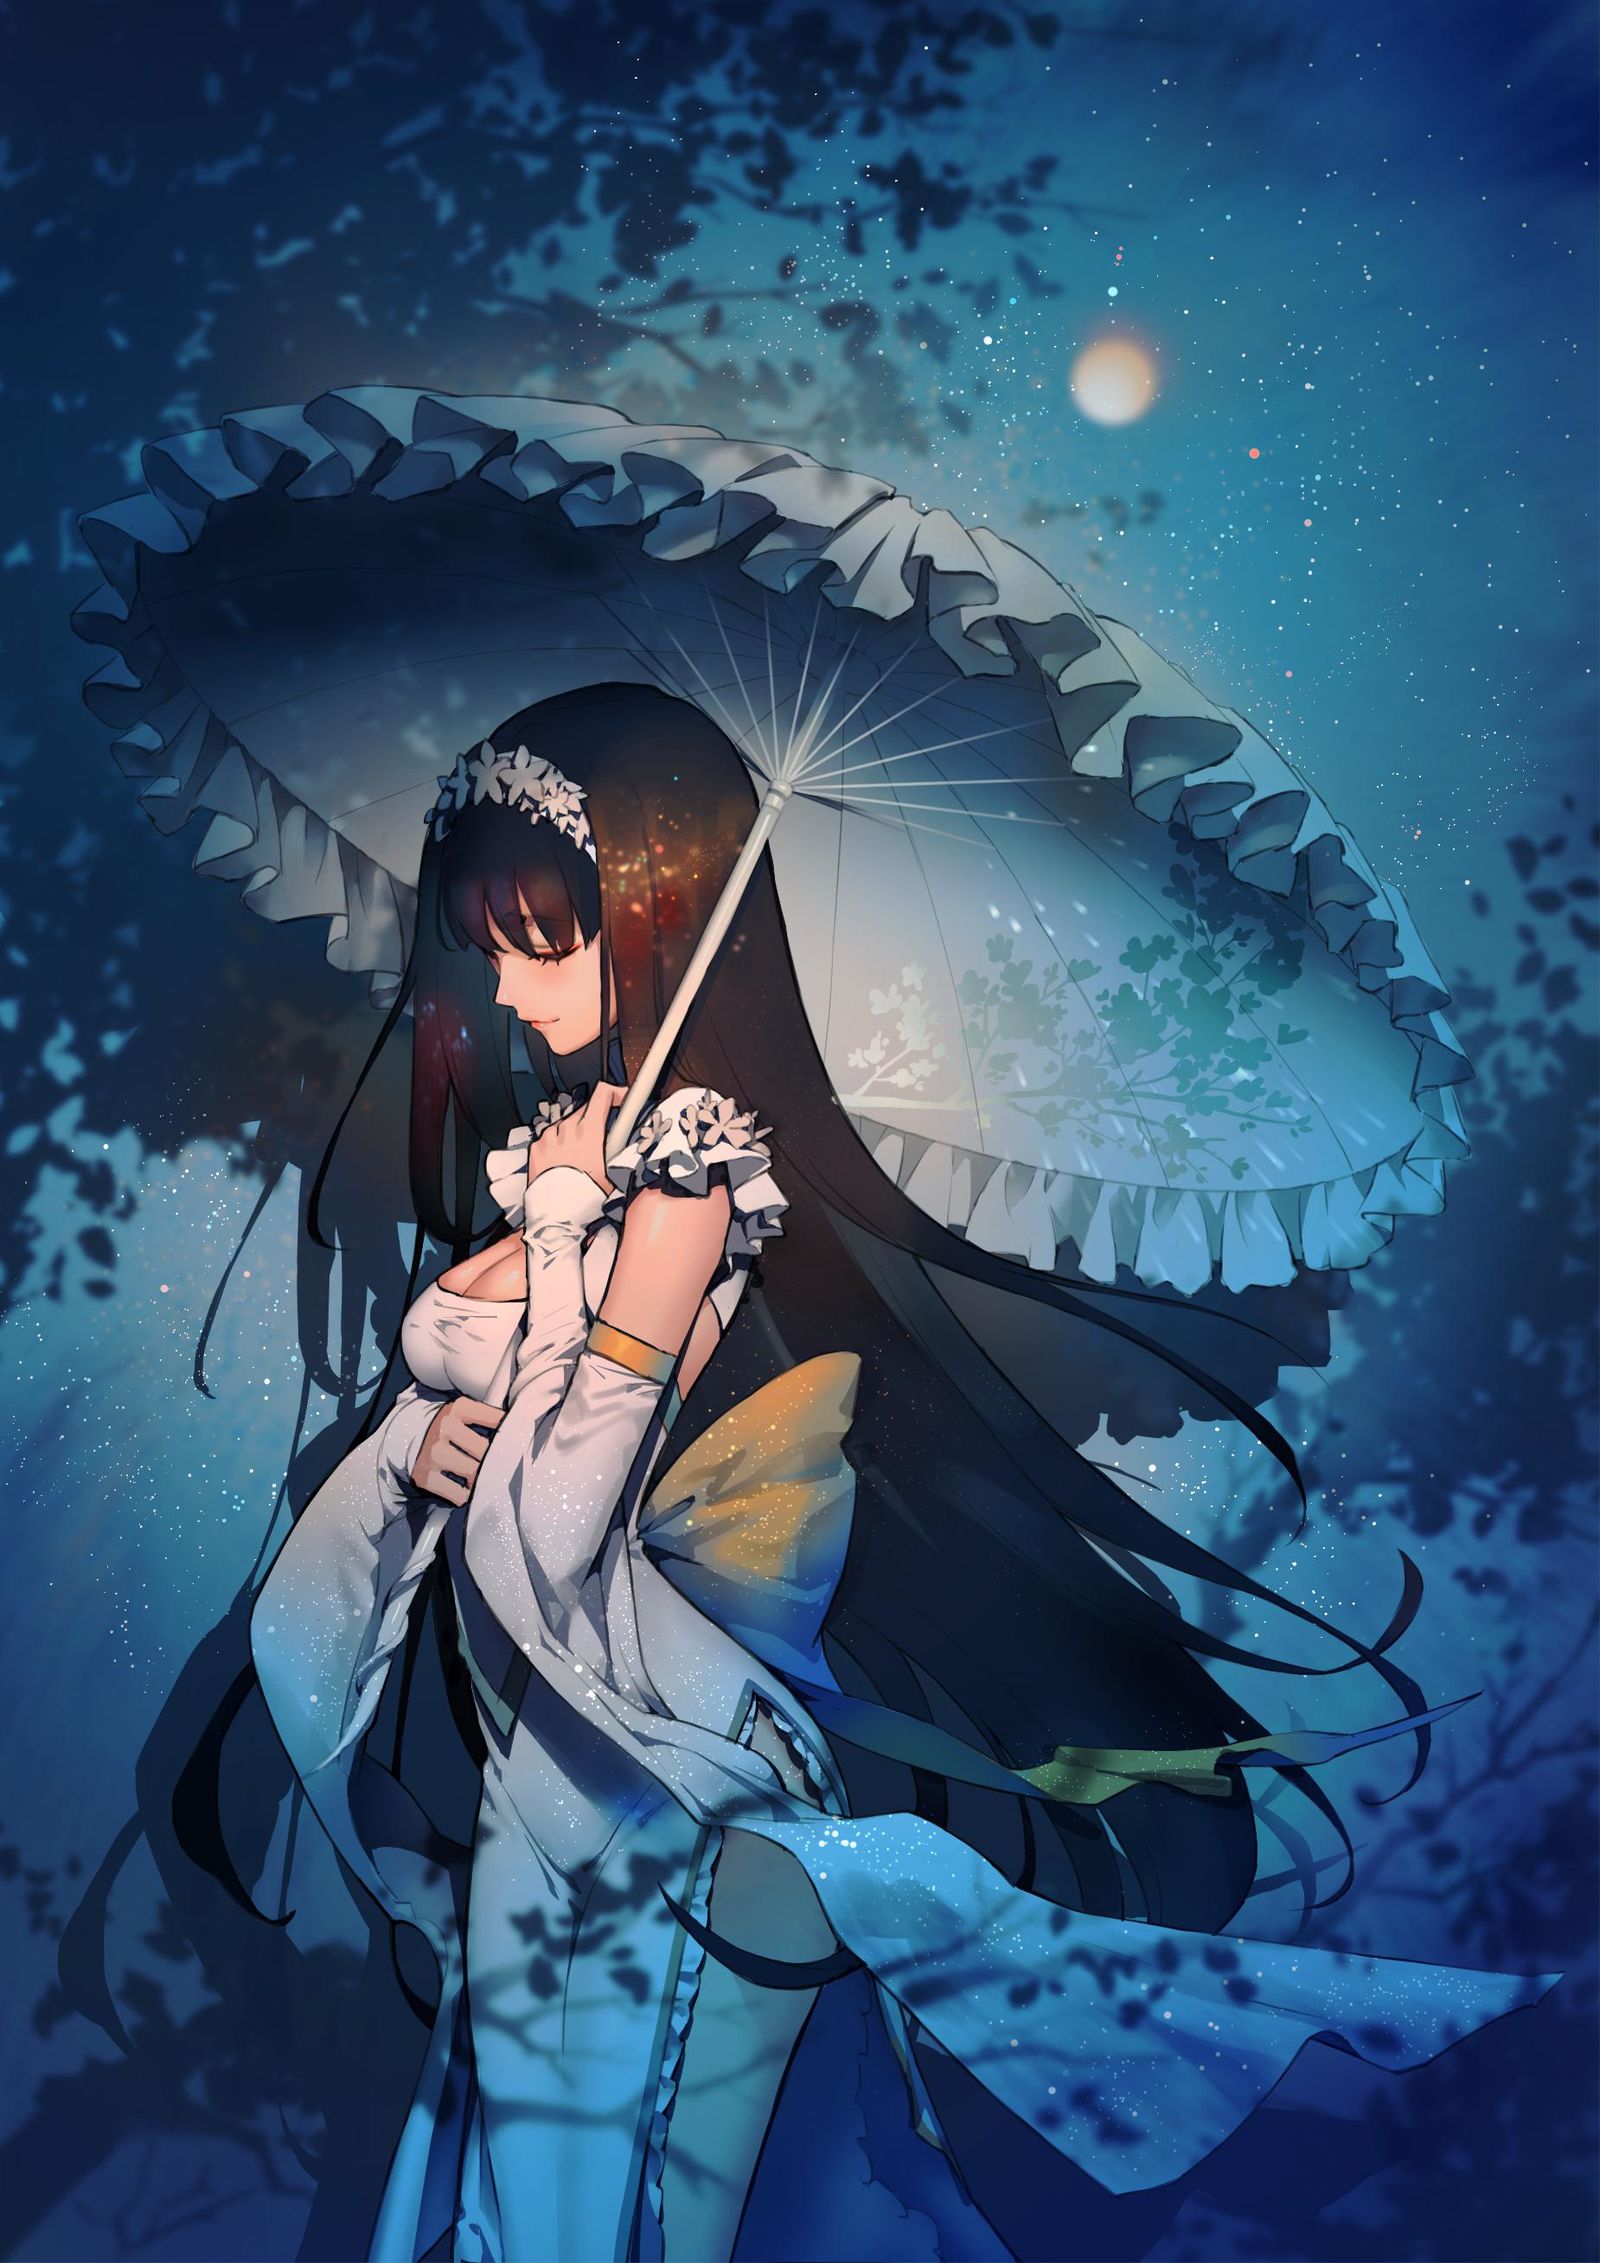 under the projected moon